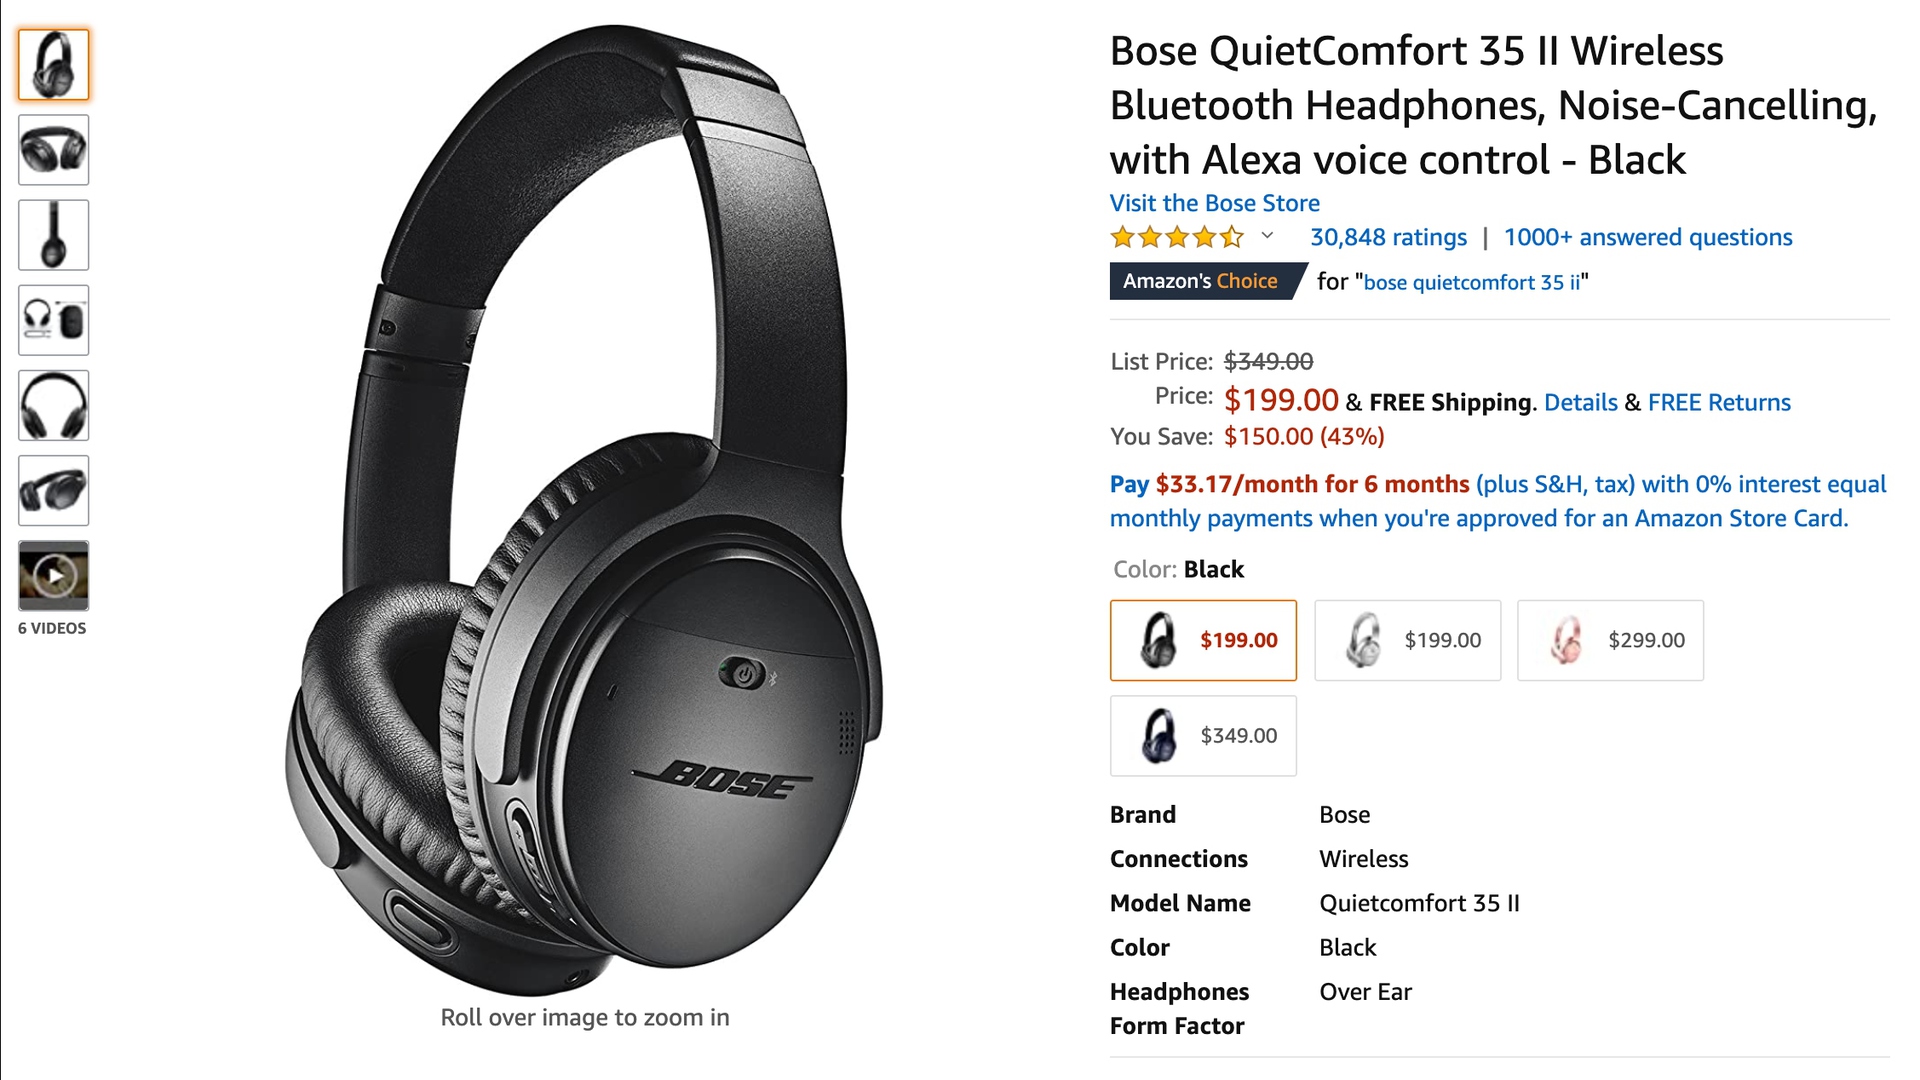 Bose QC 35 2 deal: Get $100 off on Amazon Prime Day